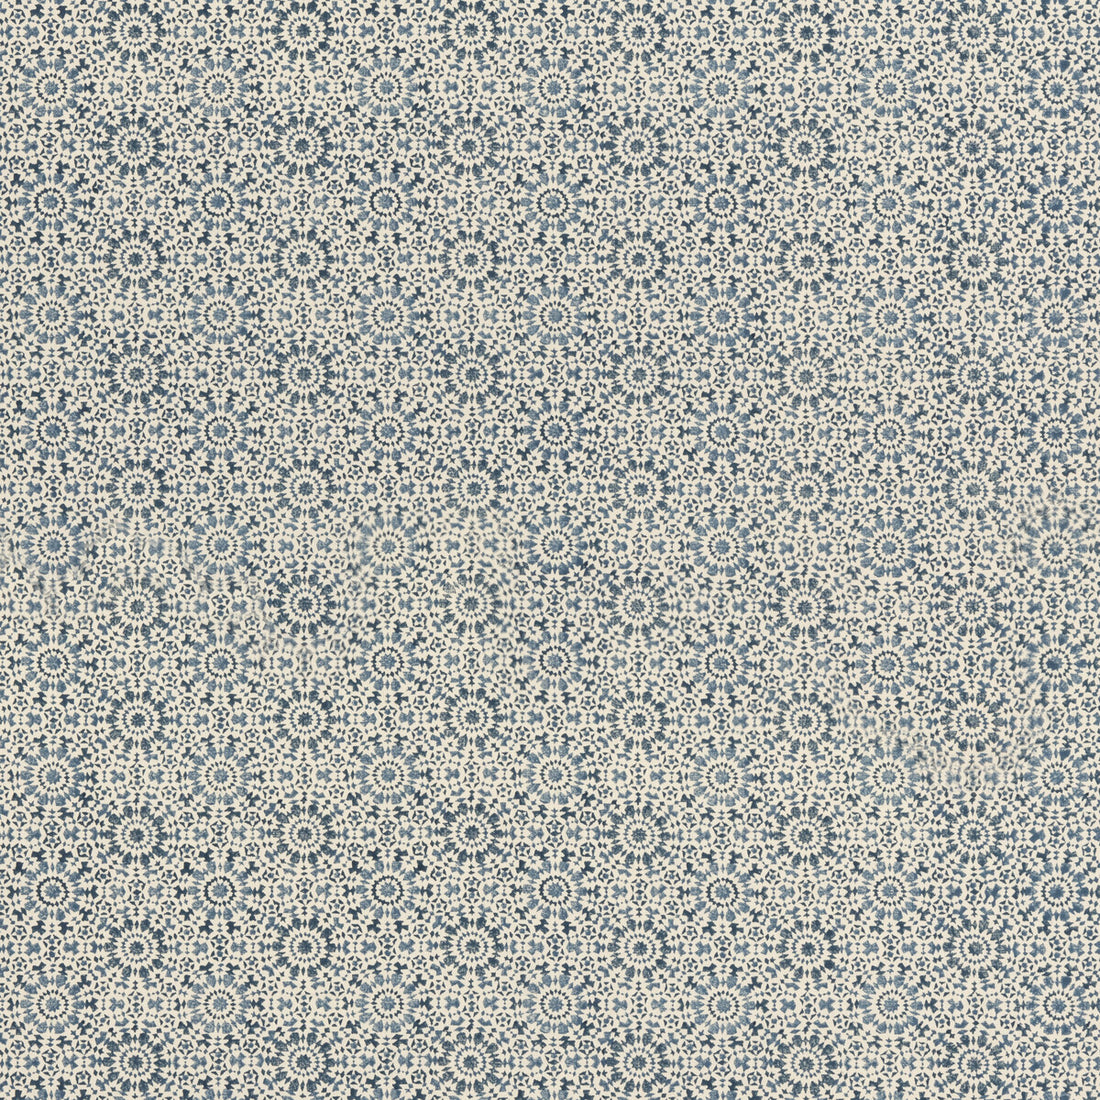 Veryan fabric in indigo color - pattern BP10792.2.0 - by G P &amp; J Baker in the Artisan II collection